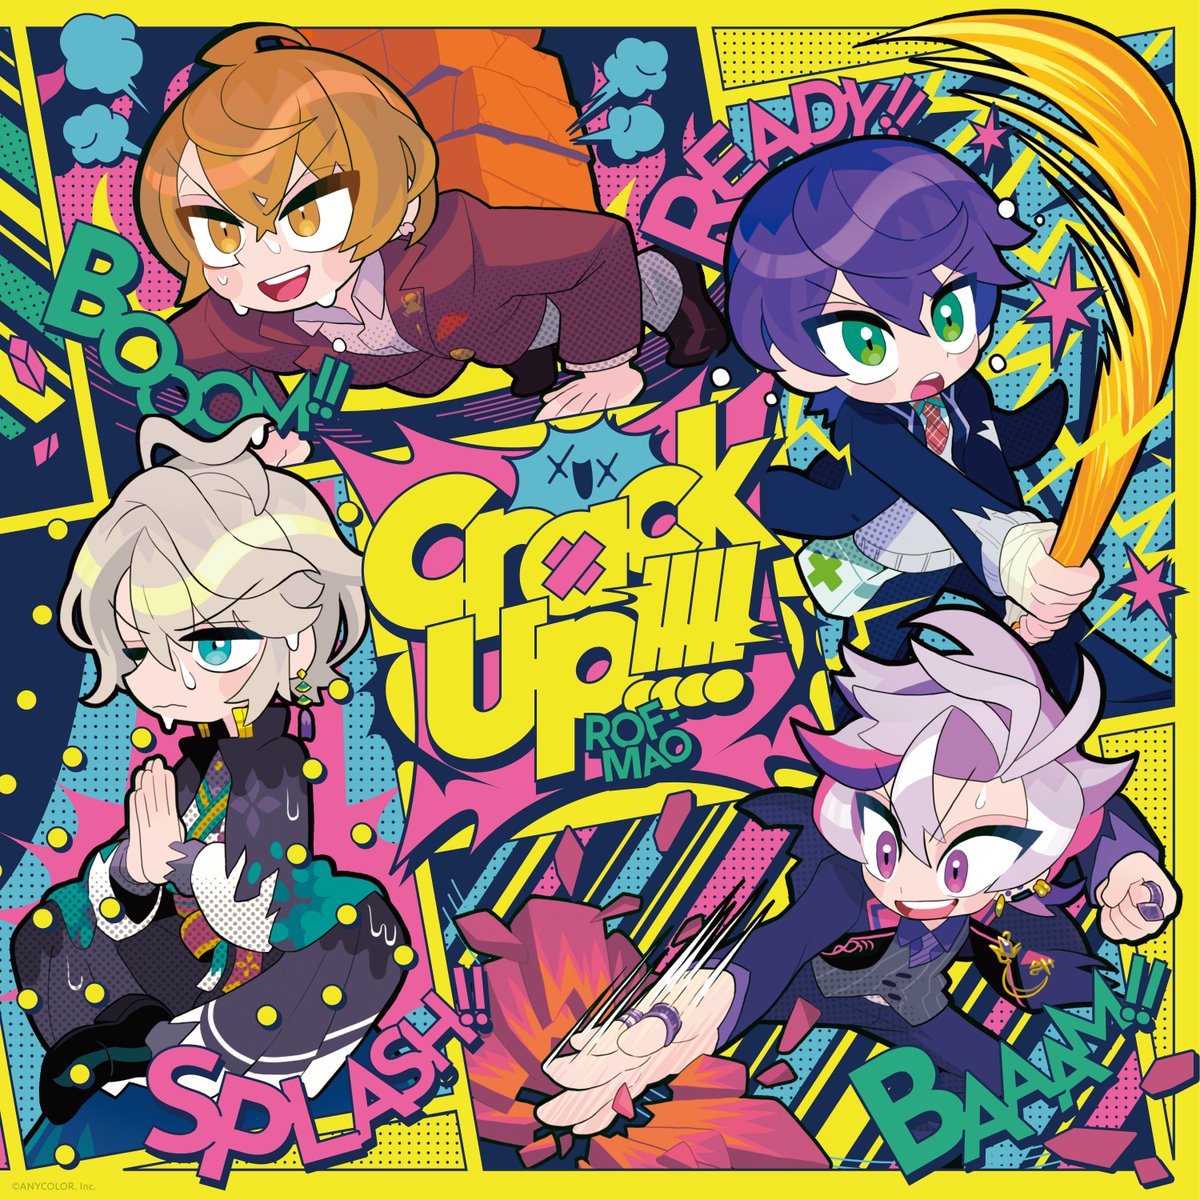 『ROF-MAO - Let's Get The Party Started!』収録の『Crack Up!!!!』ジャケット